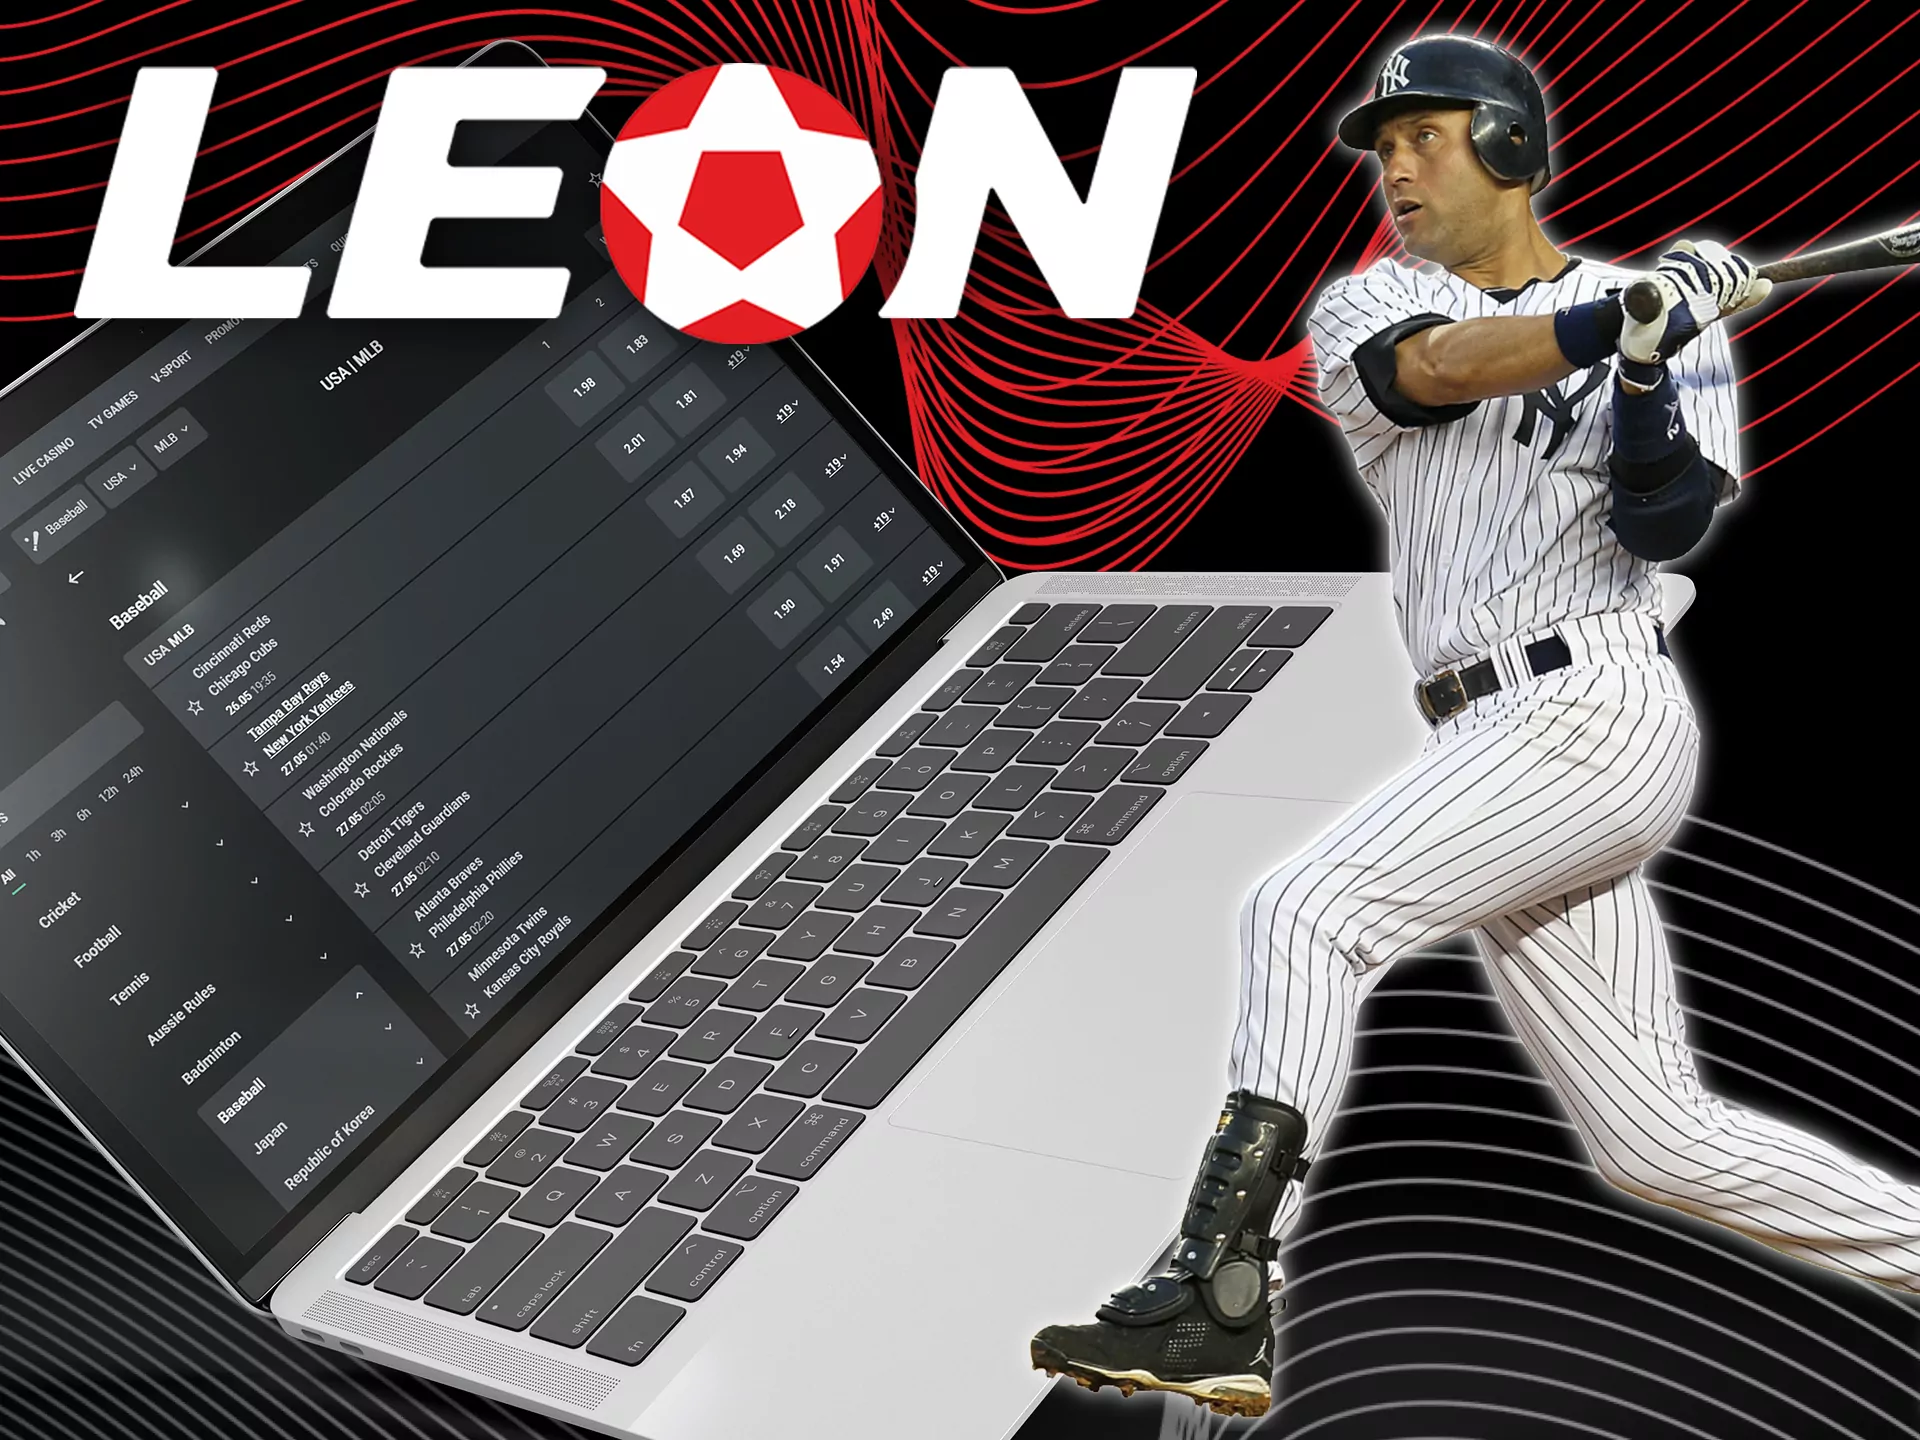 Place bets on the baseball leagues at Leon Bet.